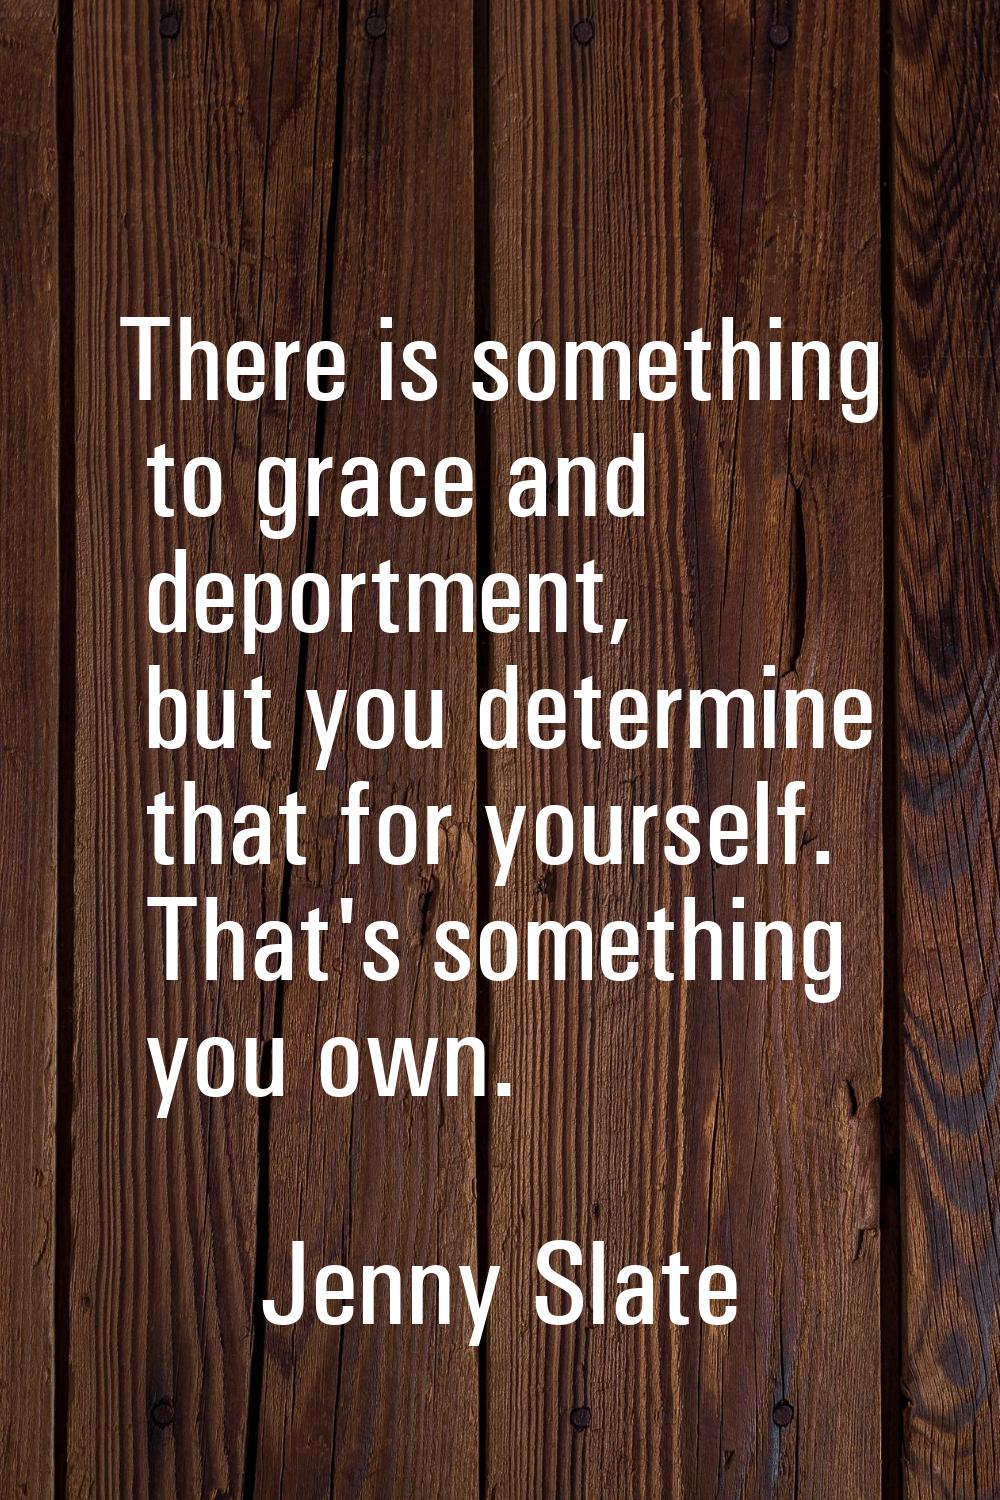 There is something to grace and deportment, but you determine that for yourself. That's something y